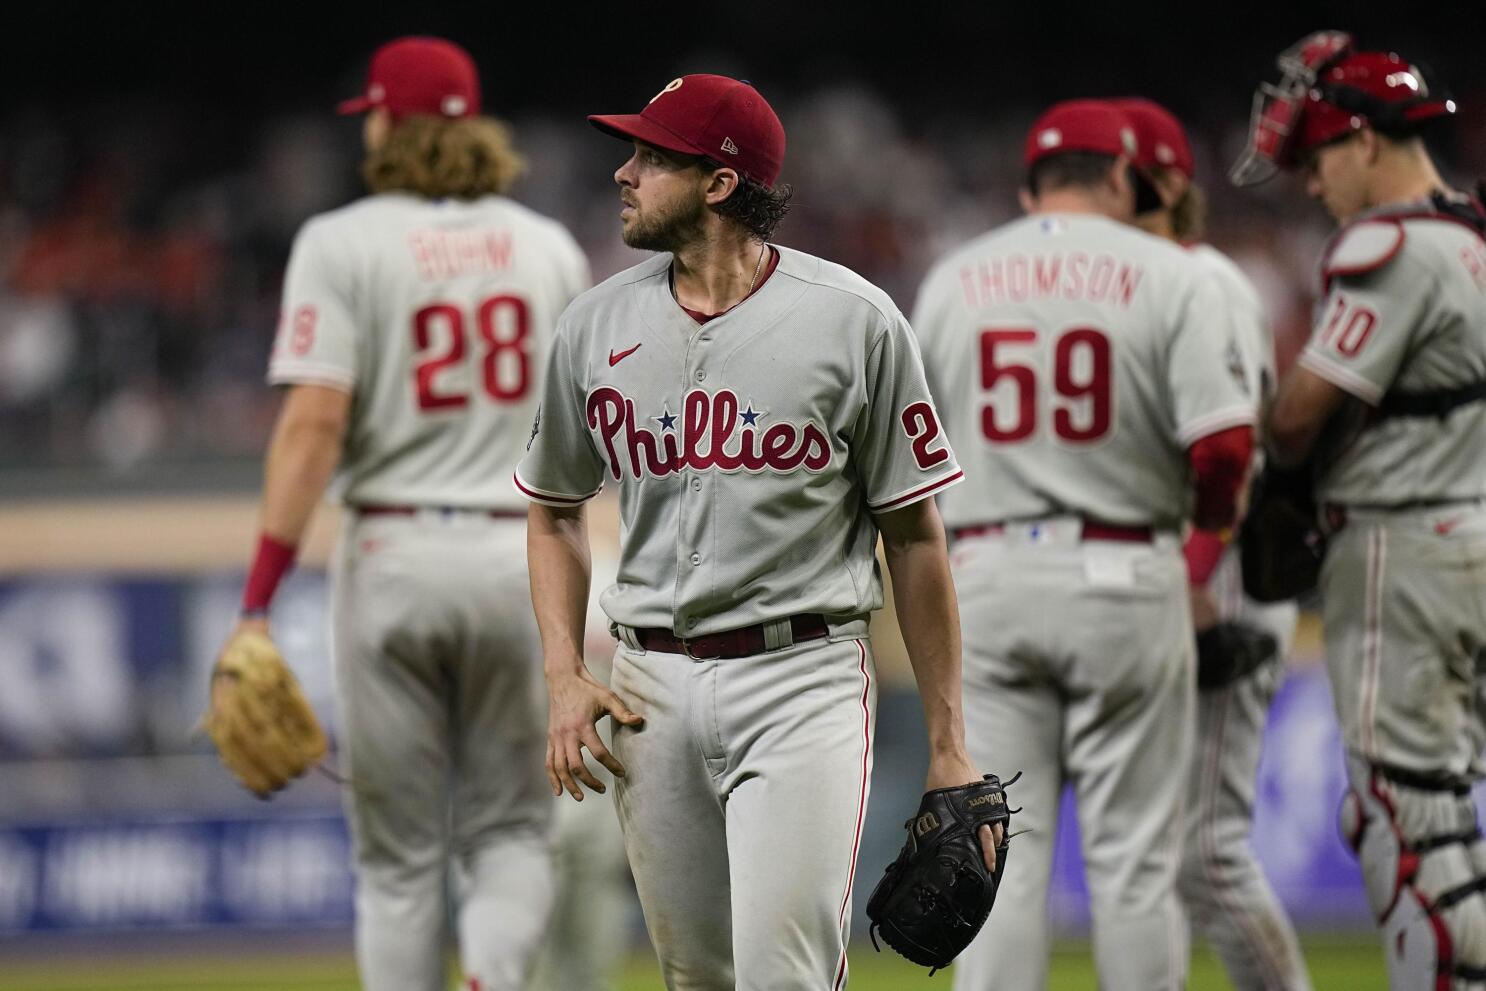 Phillies down Astros for 1st playoff berth since 2011 - WHYY